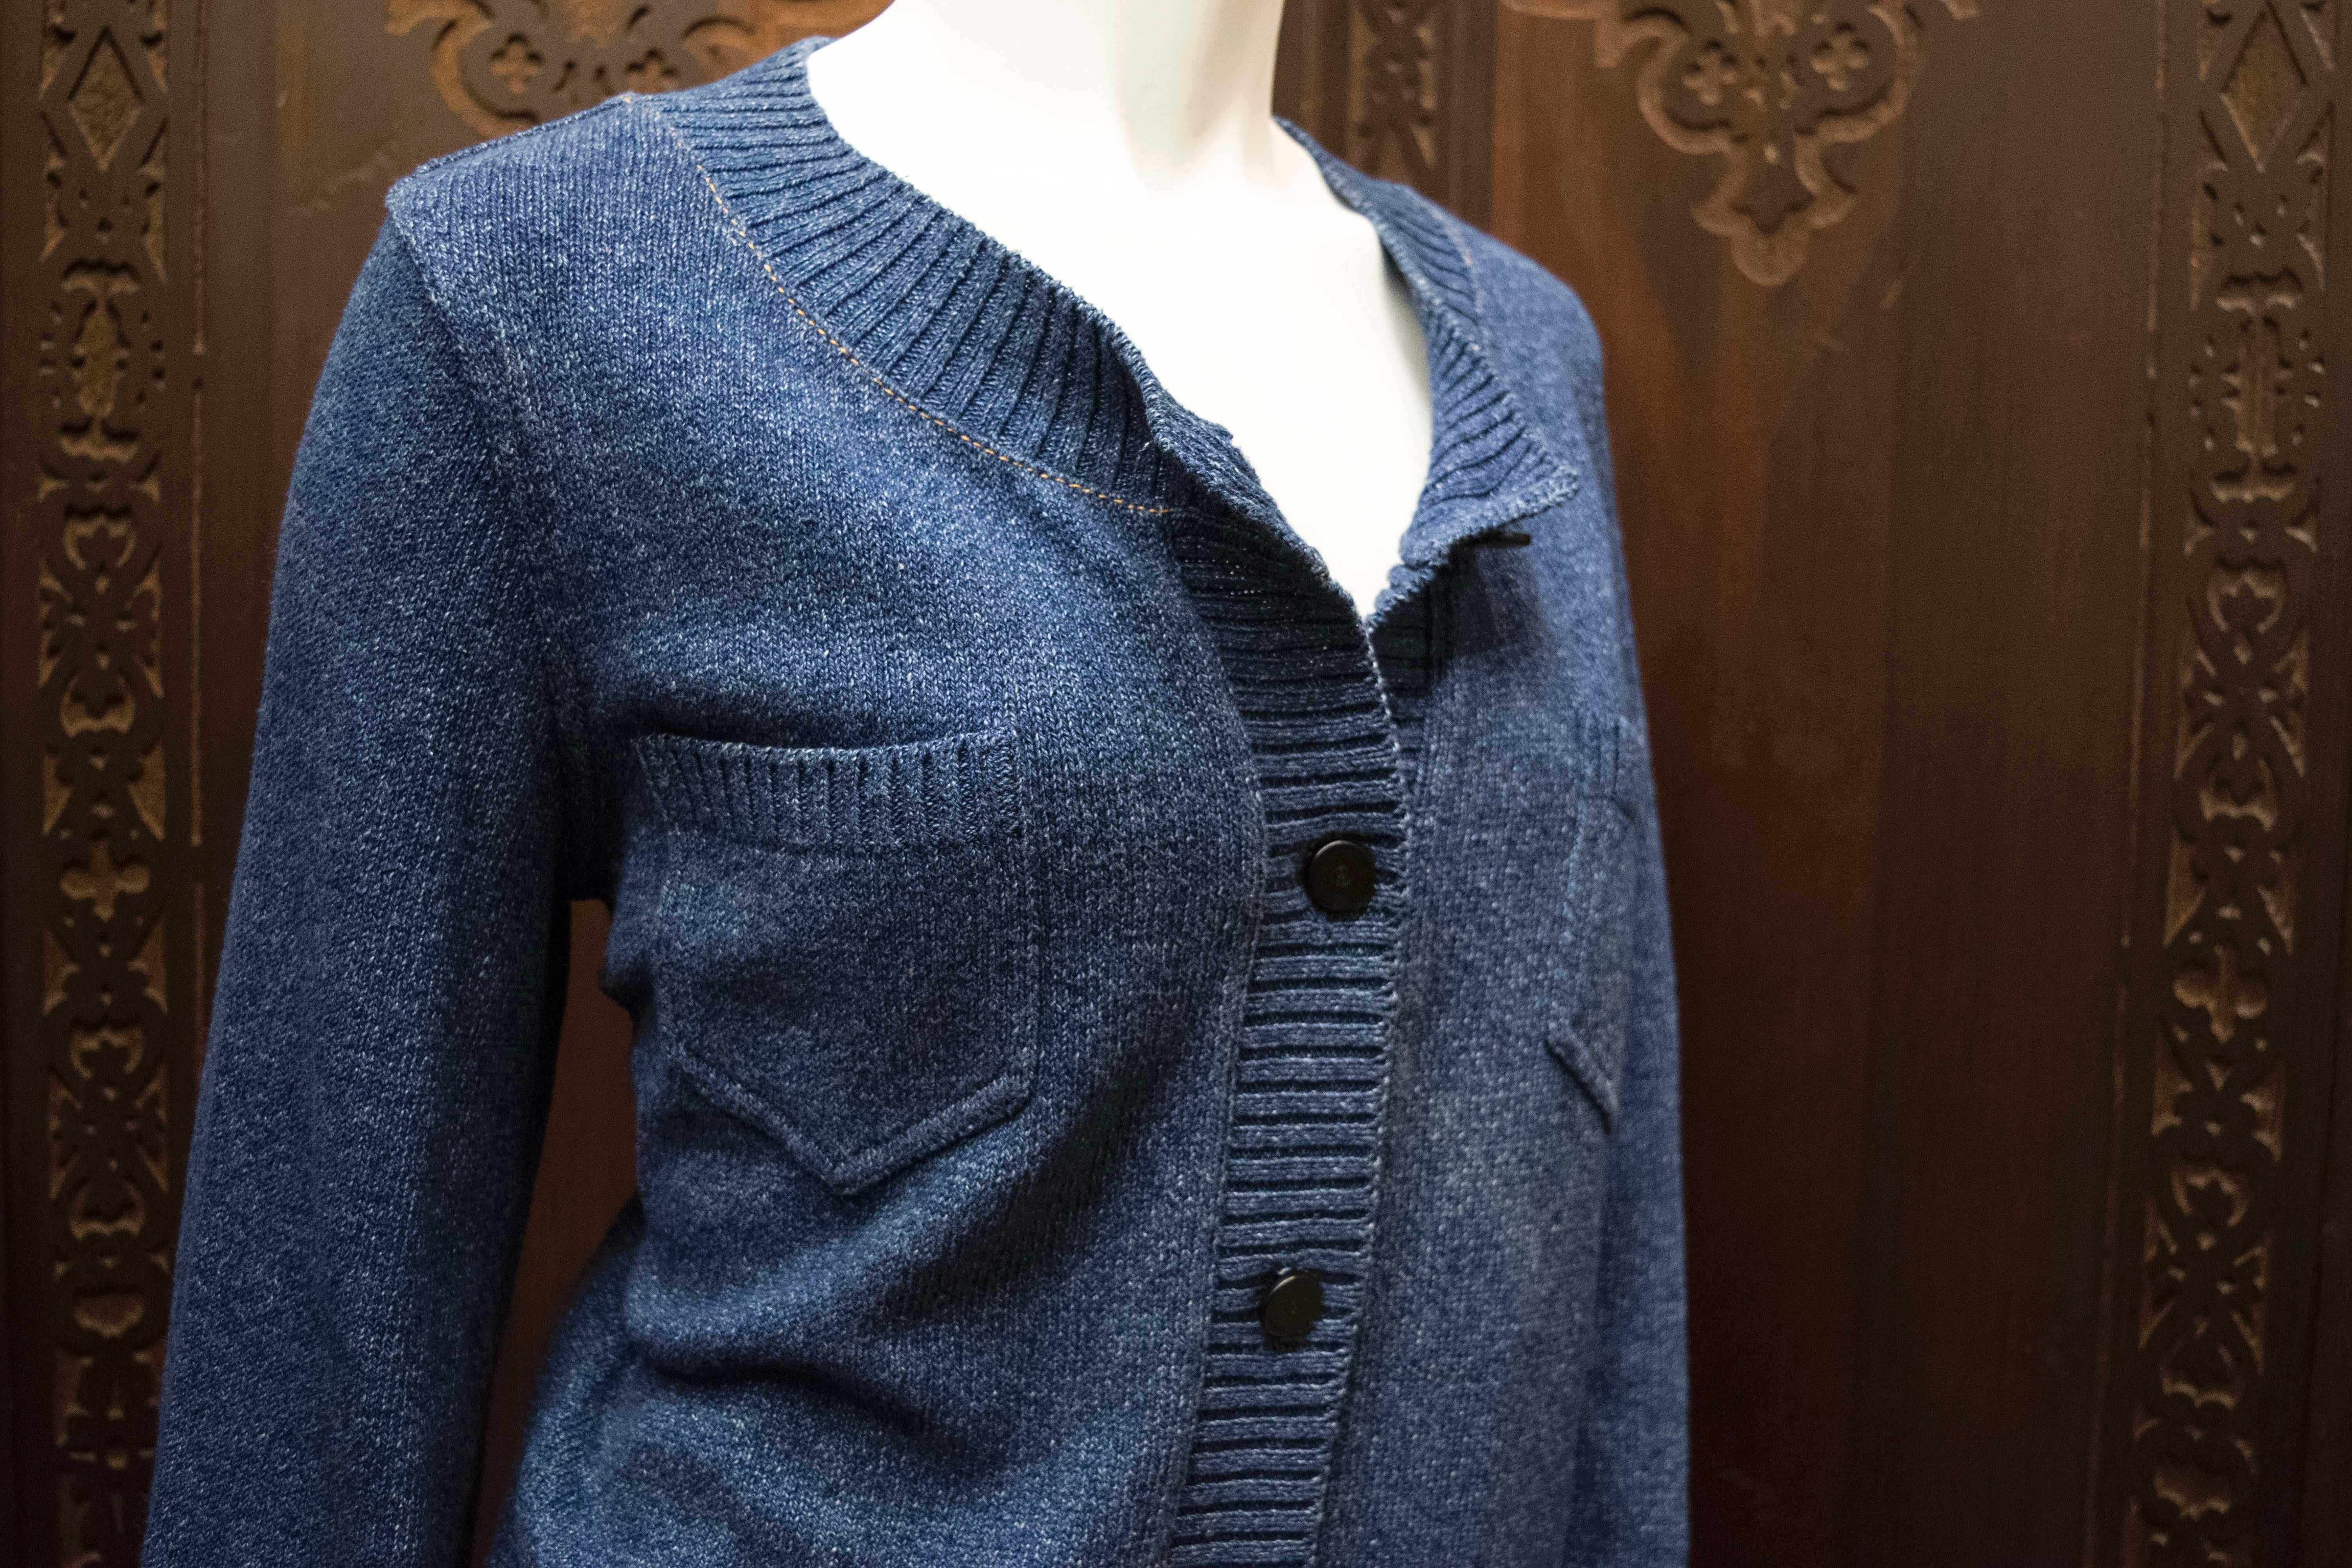 90s Chanel Blue Knit Cardigan 

Sublime Chanel cardigan, from the Winter collection and is a fantastic staple item for fall. Measuring

Bust: 40 inches
Hemline of cardigan: 42 inches
Sleeve Length (measured from top of shoulder seam to wrist):